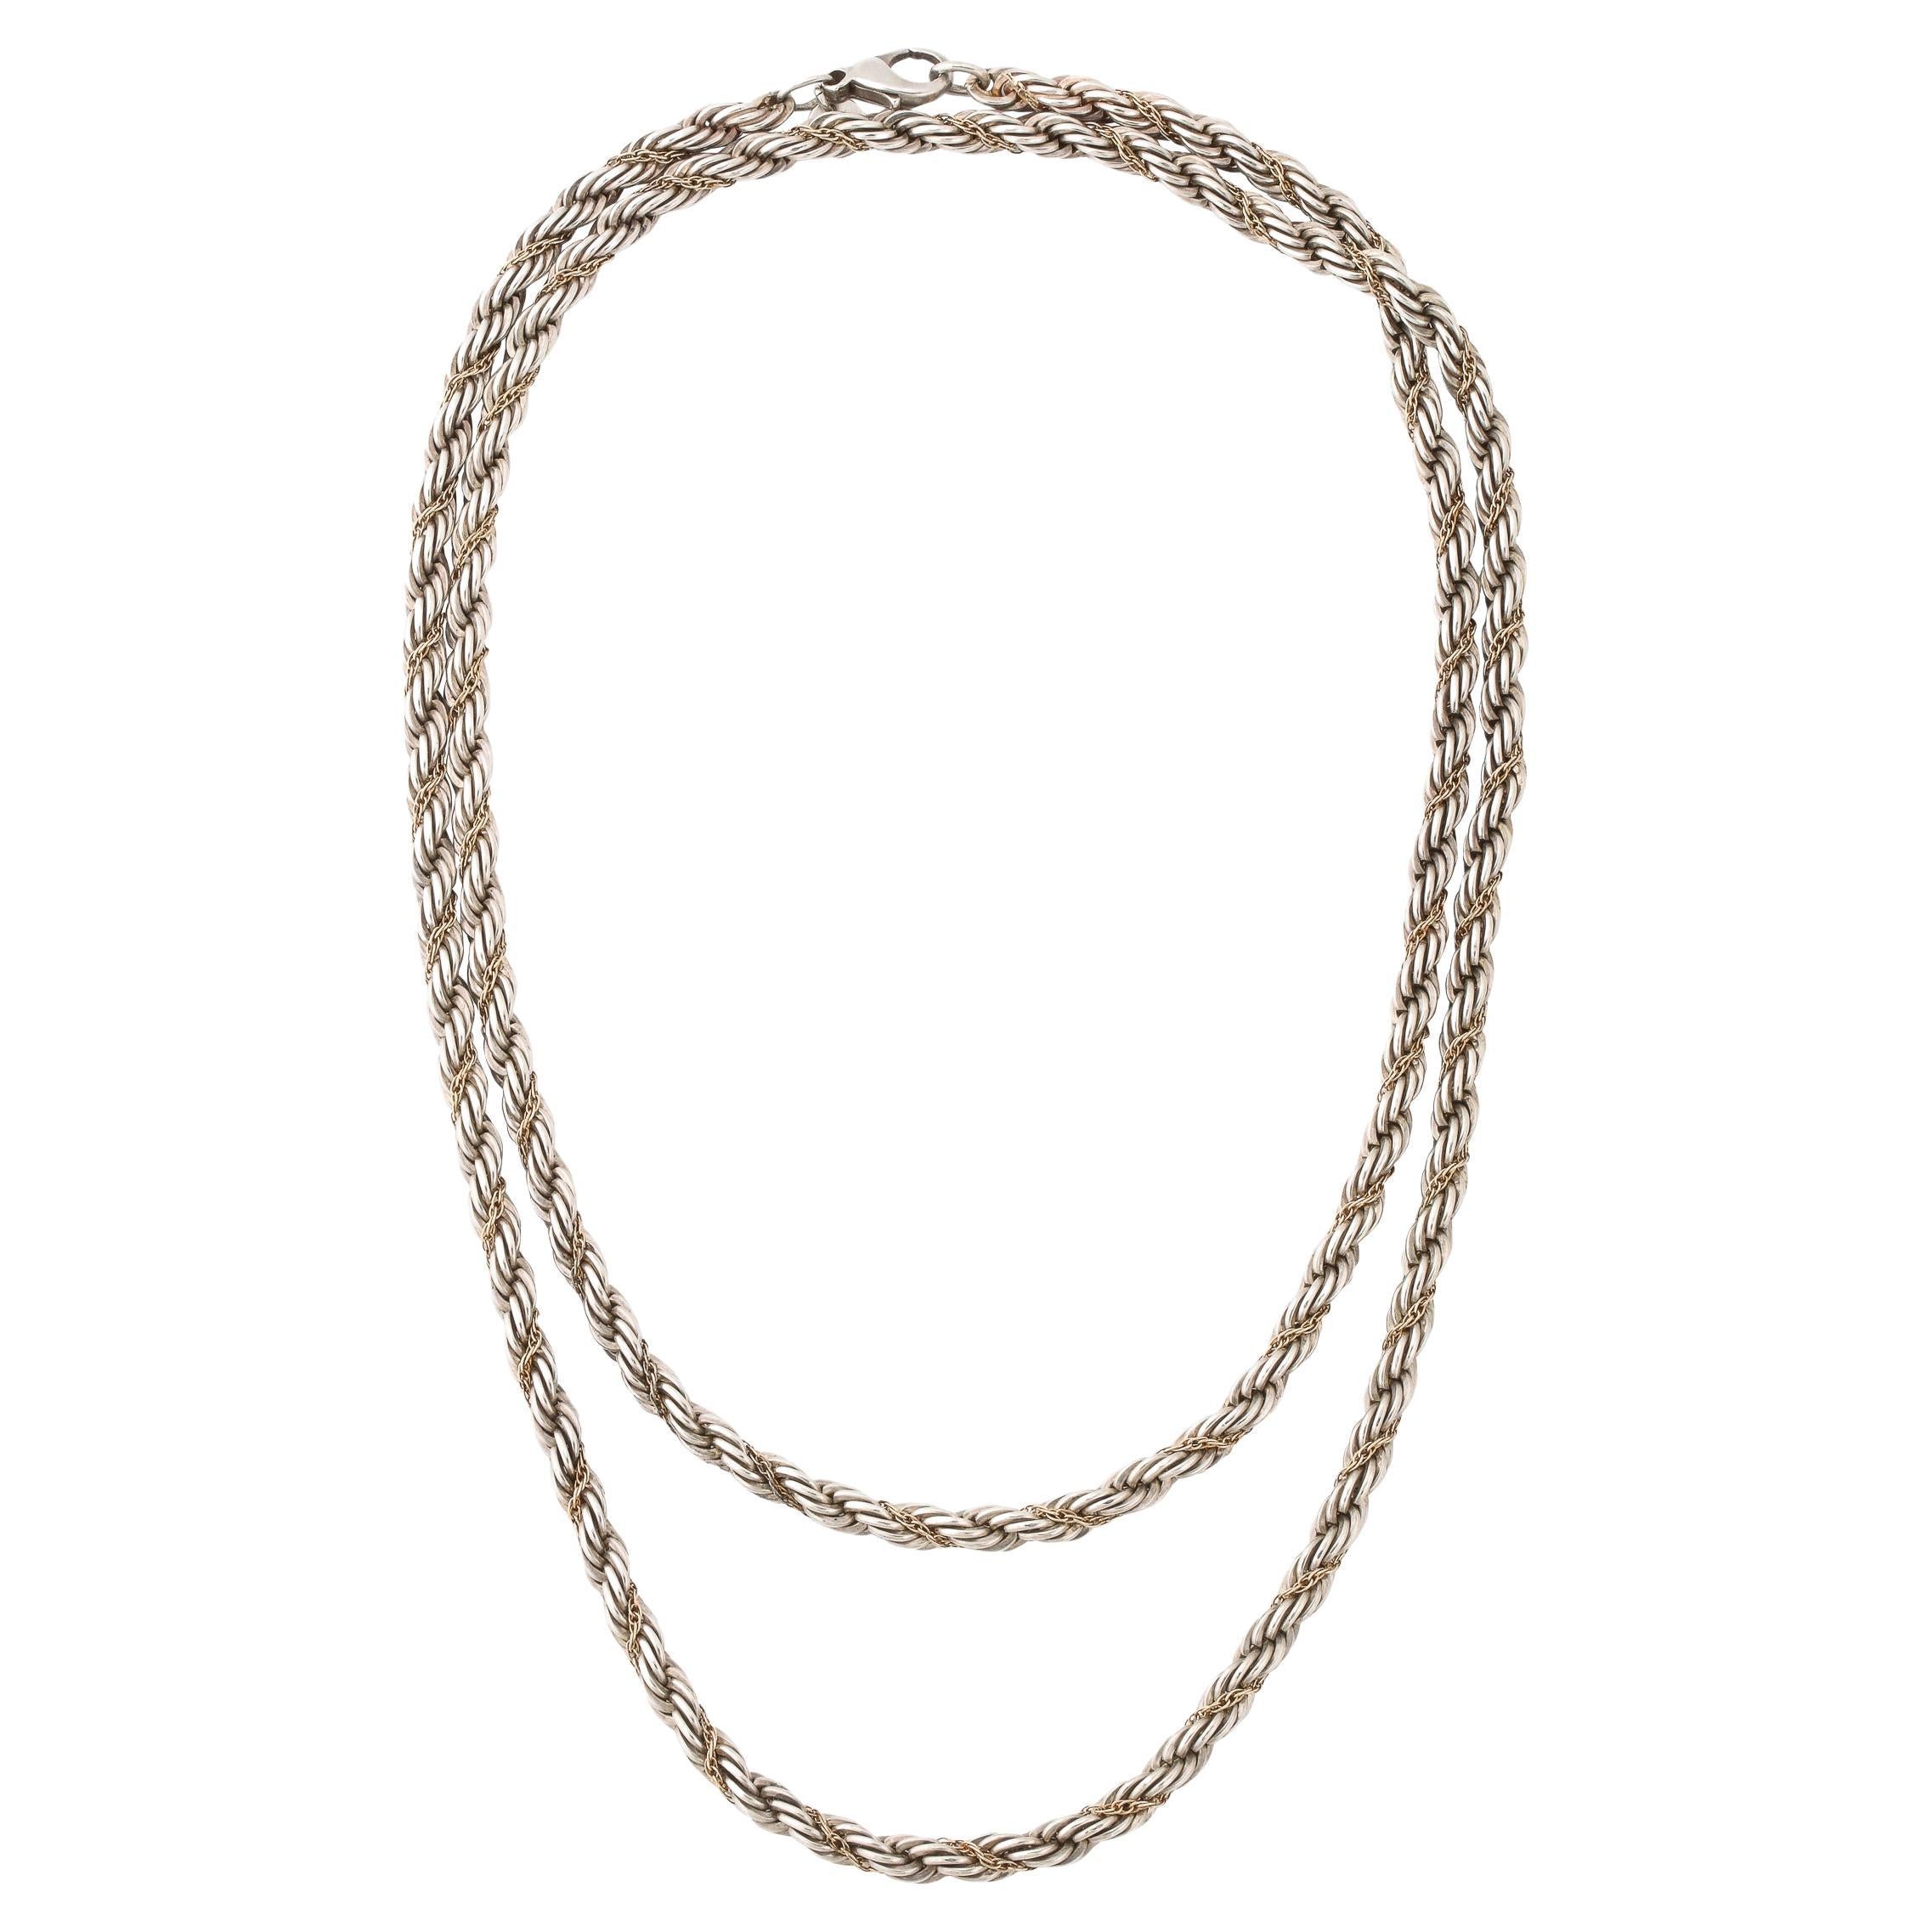 Tiffany & Co. Gold & Sterling Twist Rope Chain Necklace